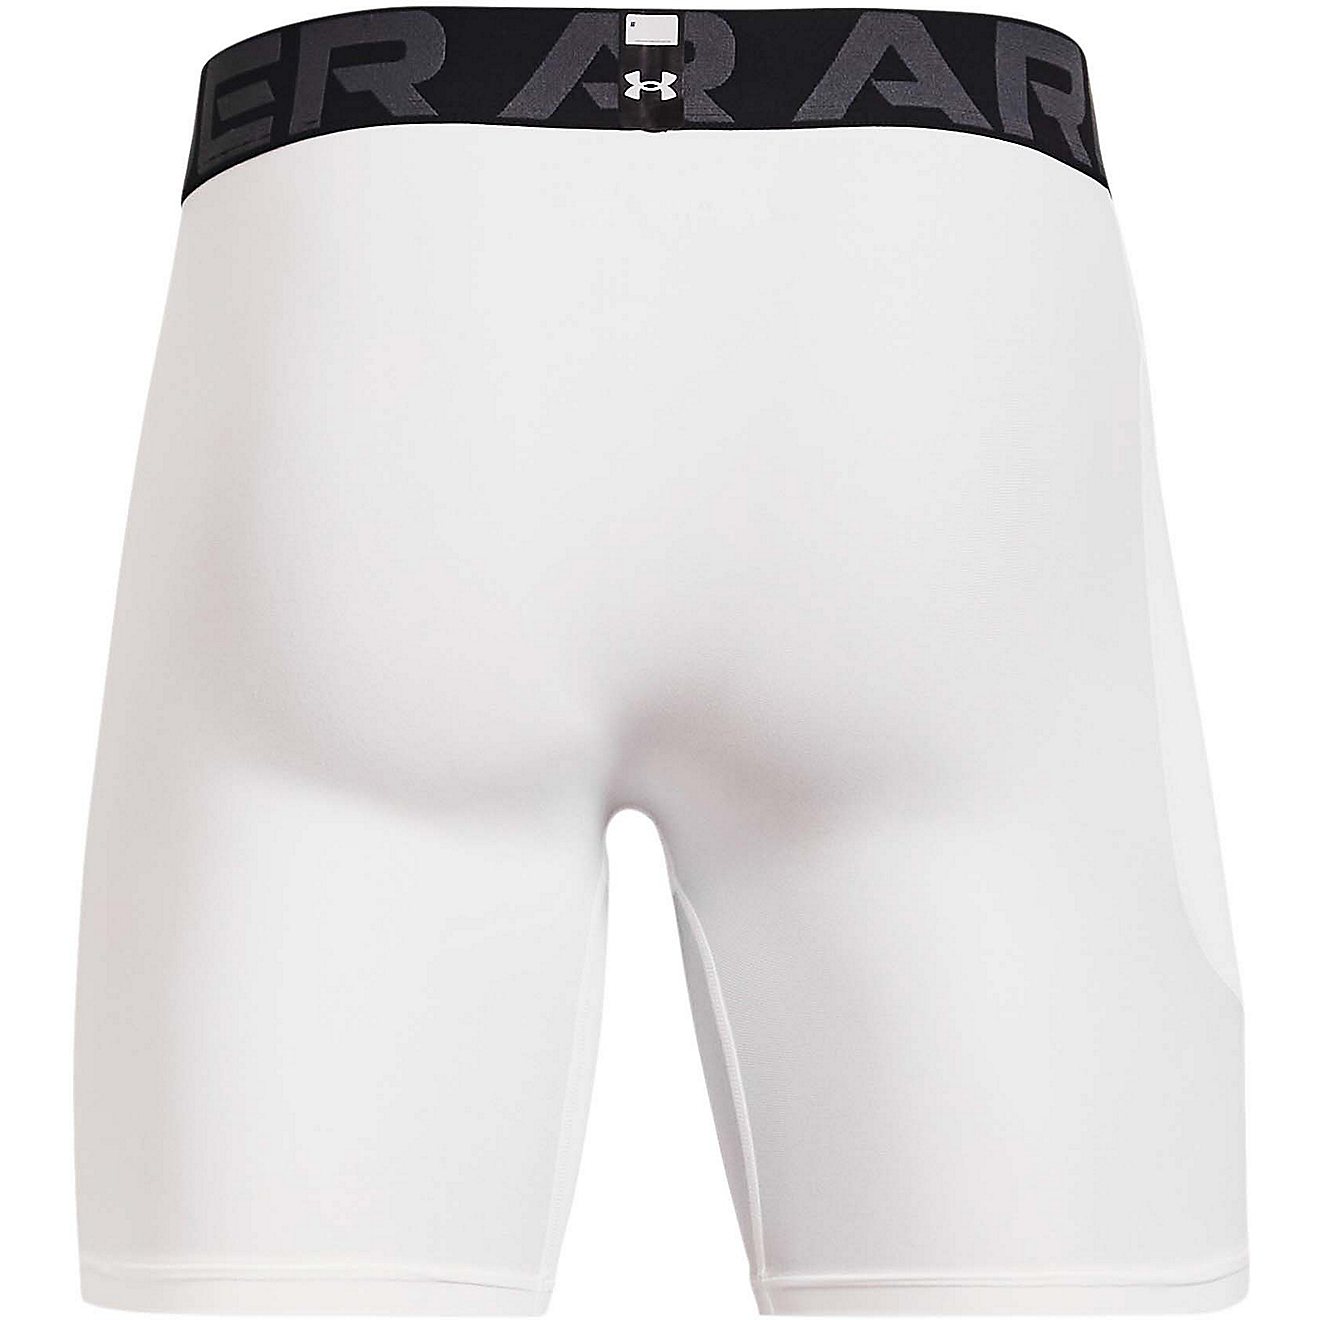 Under Armour Men's HeatGear Compression Shorts 6 in                                                                              - view number 6